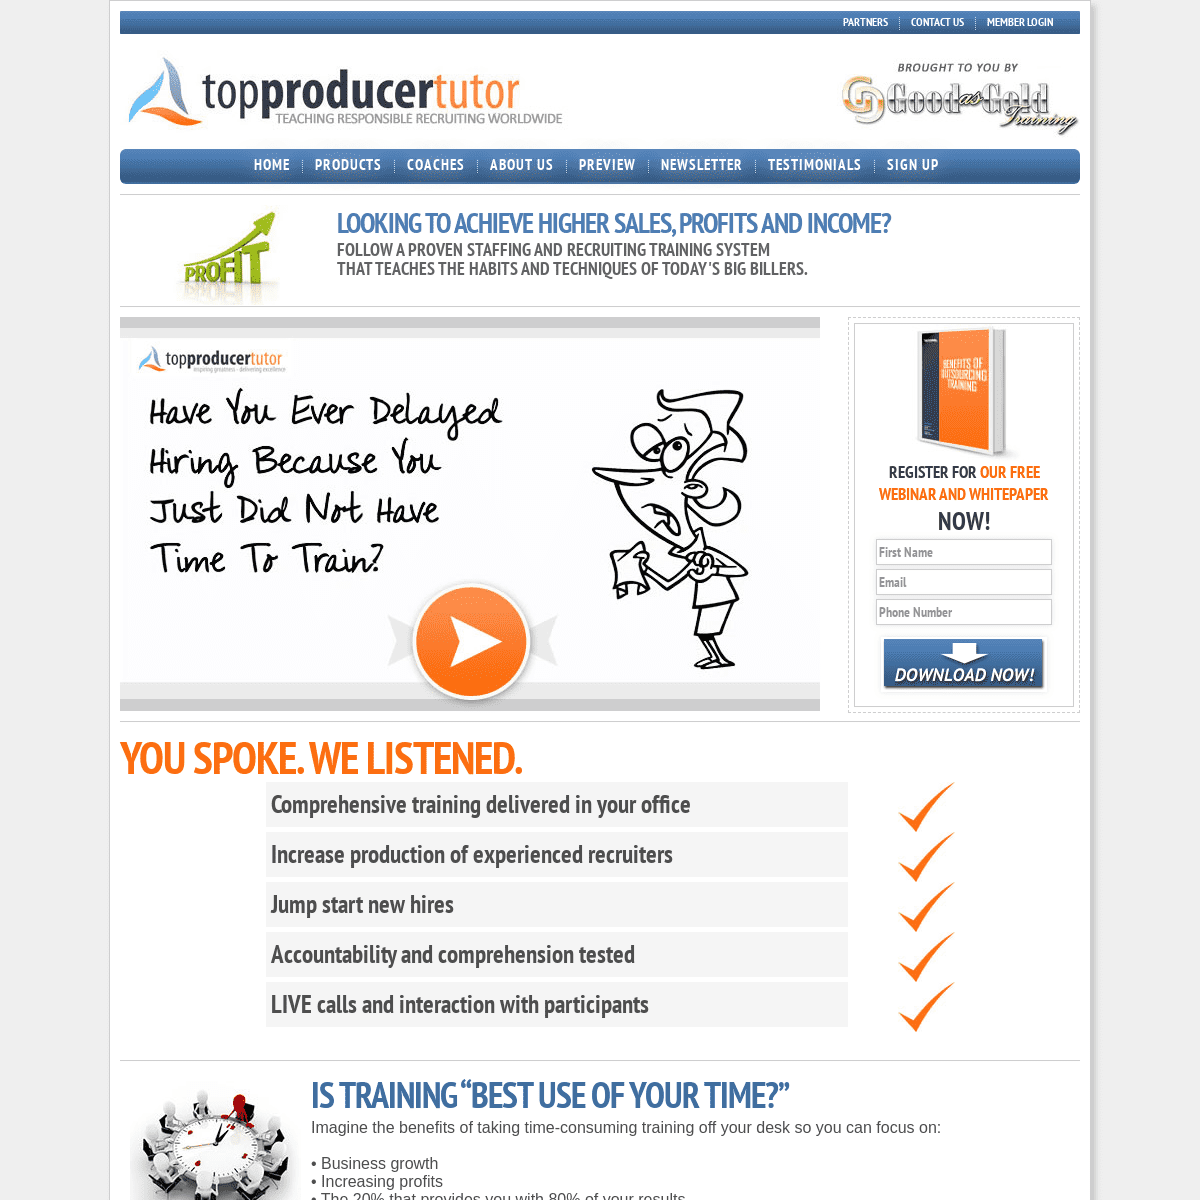 A complete backup of topproducertutor.com